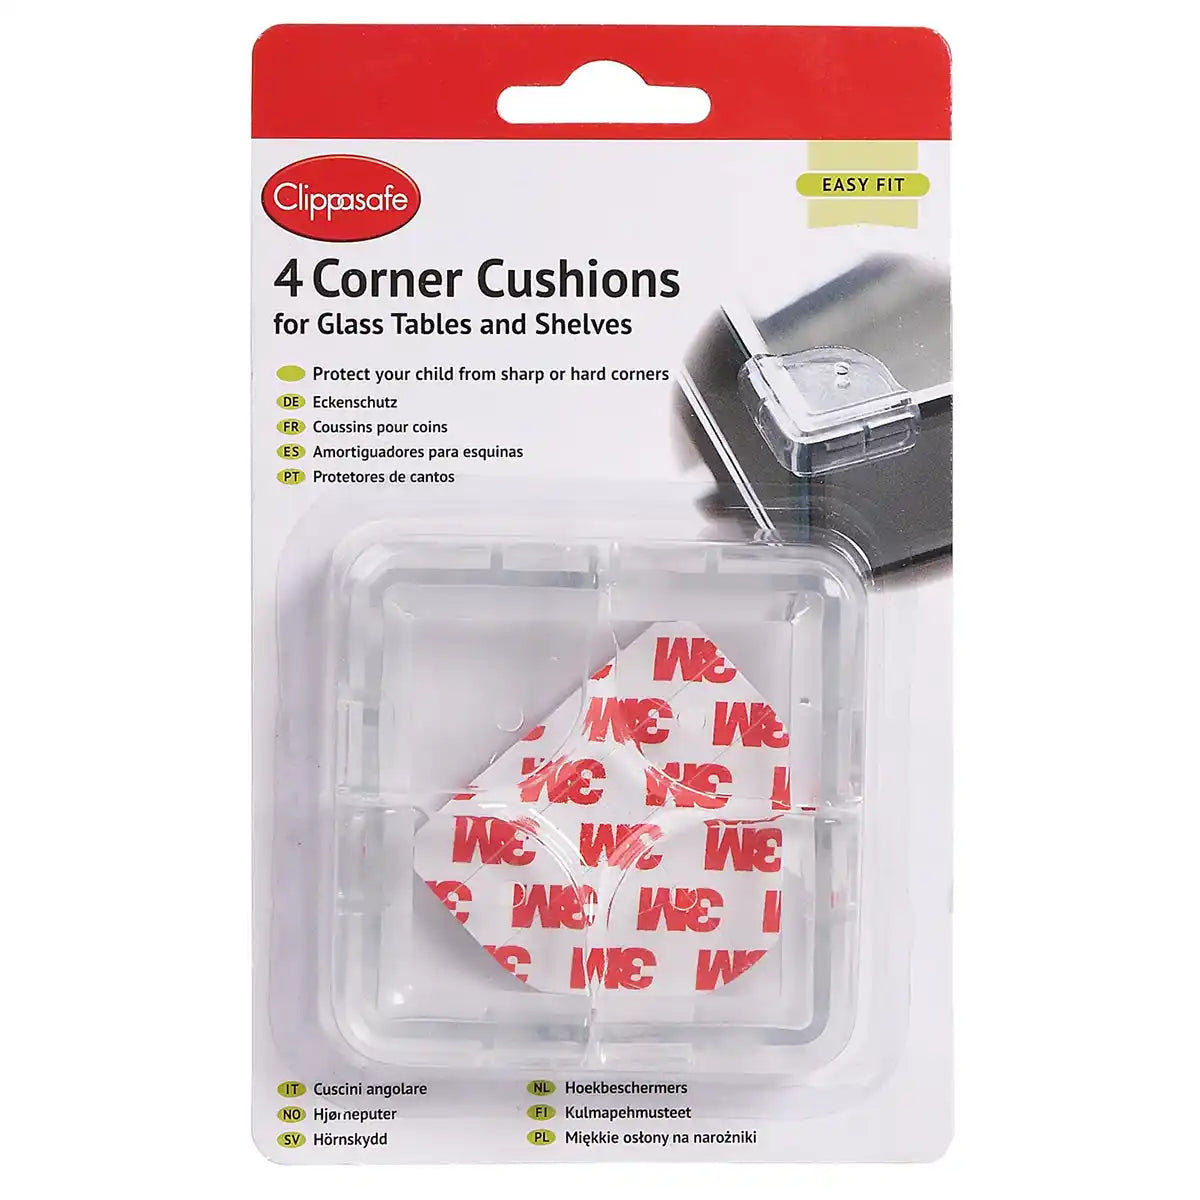 Clippasafe Corner Cushions For Glass Tops (4 Pack)